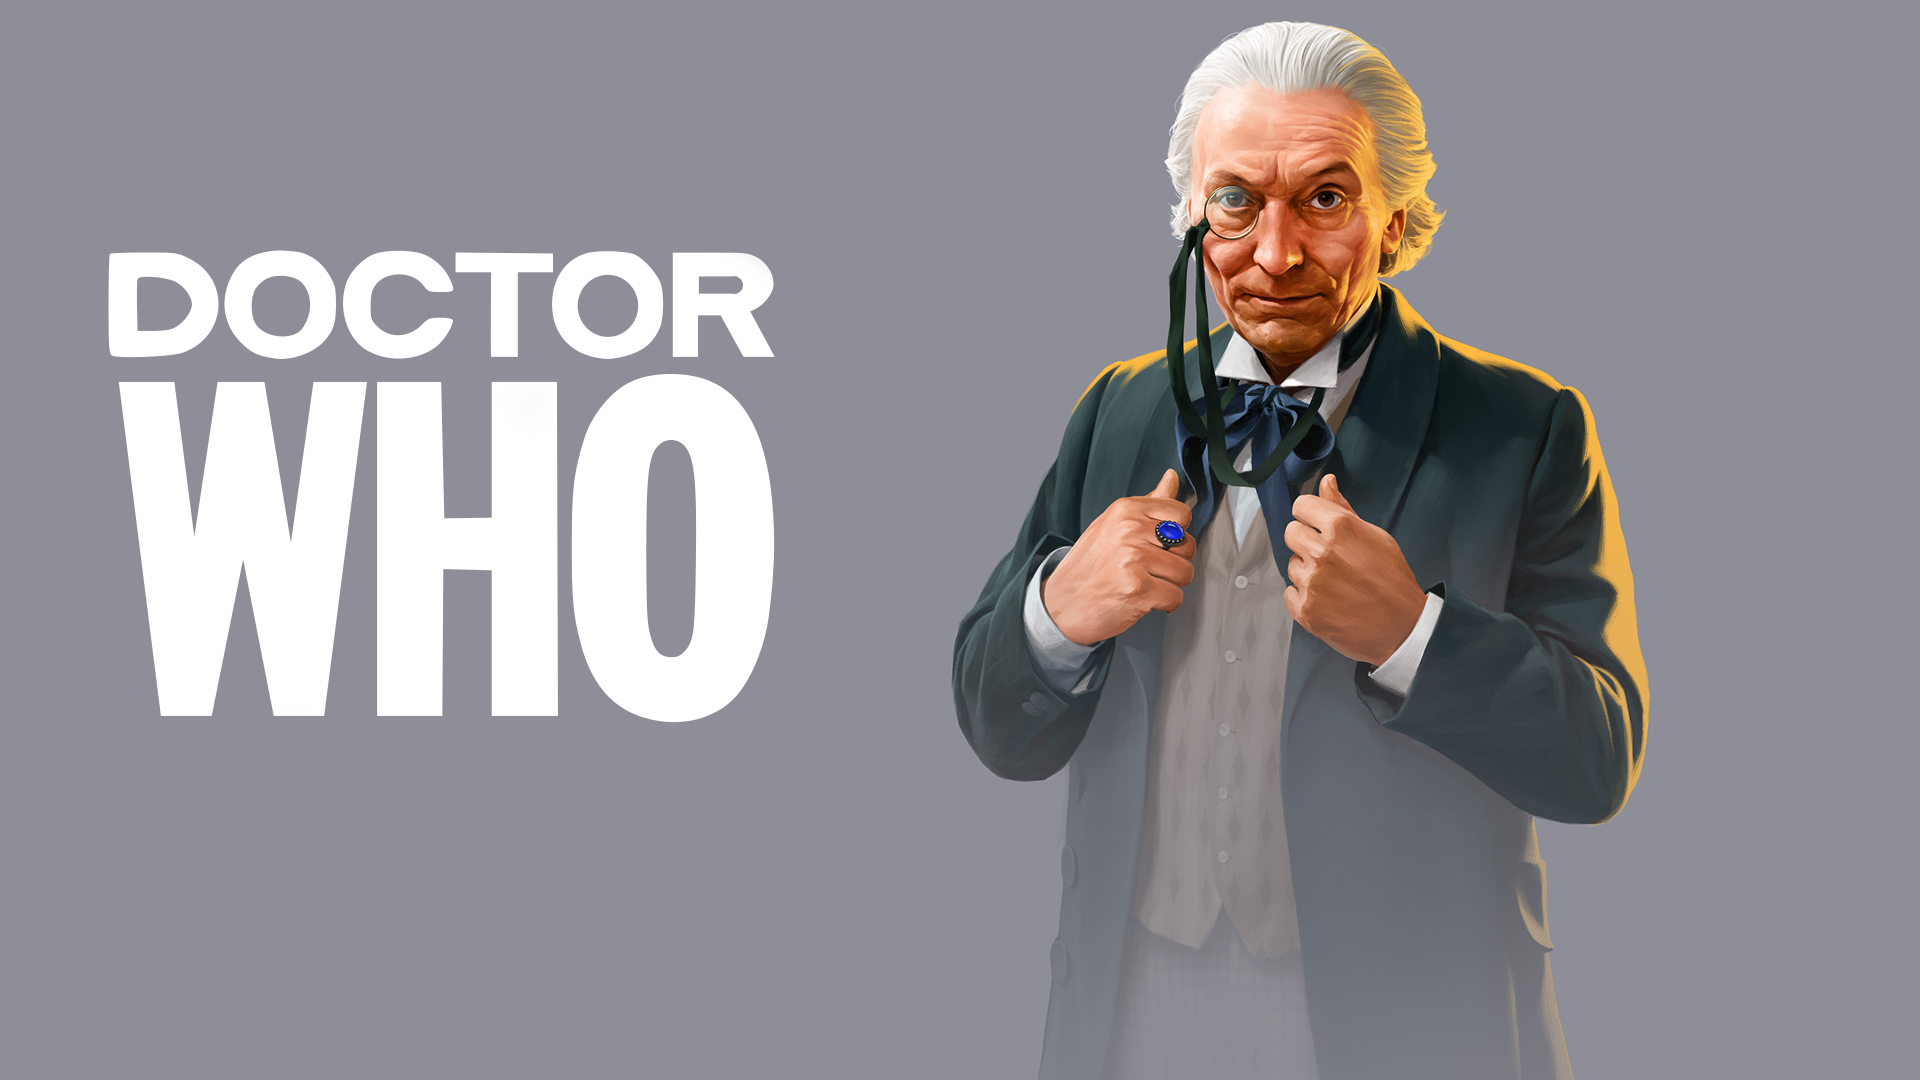 Doctor Who - First Doctor Wallpaper by Spirit--Of-Adventure on DeviantArt